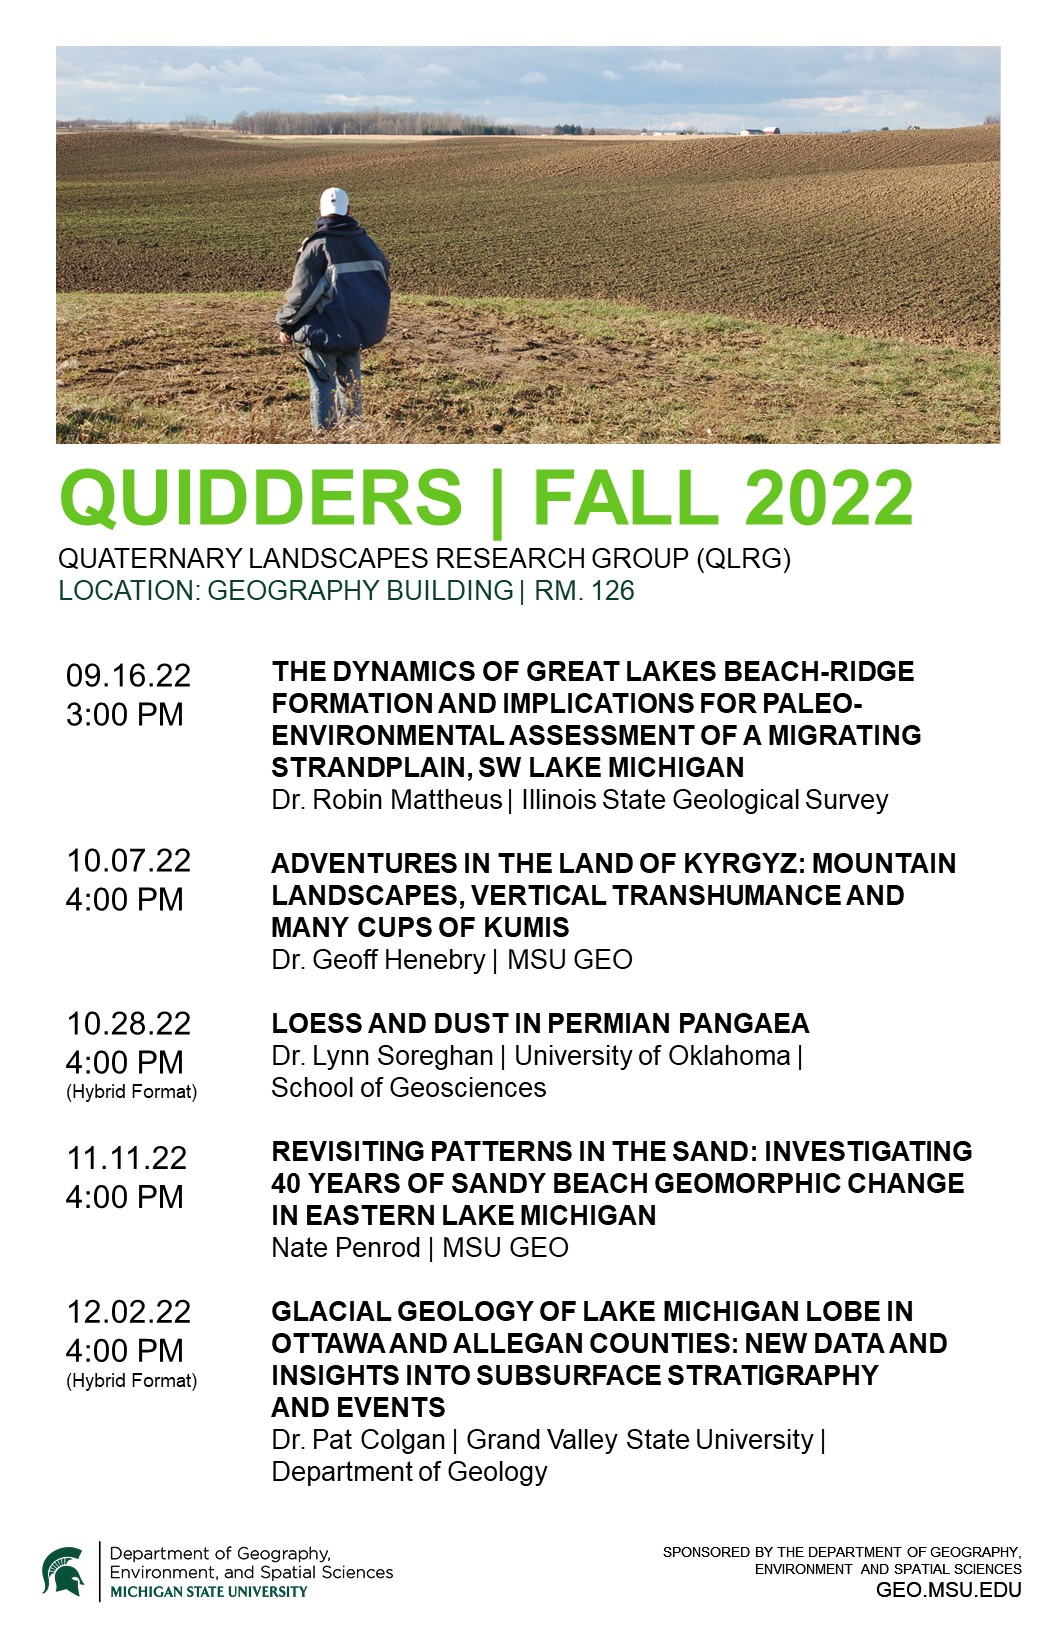 Flyer for Quidders Fall 2022 Series